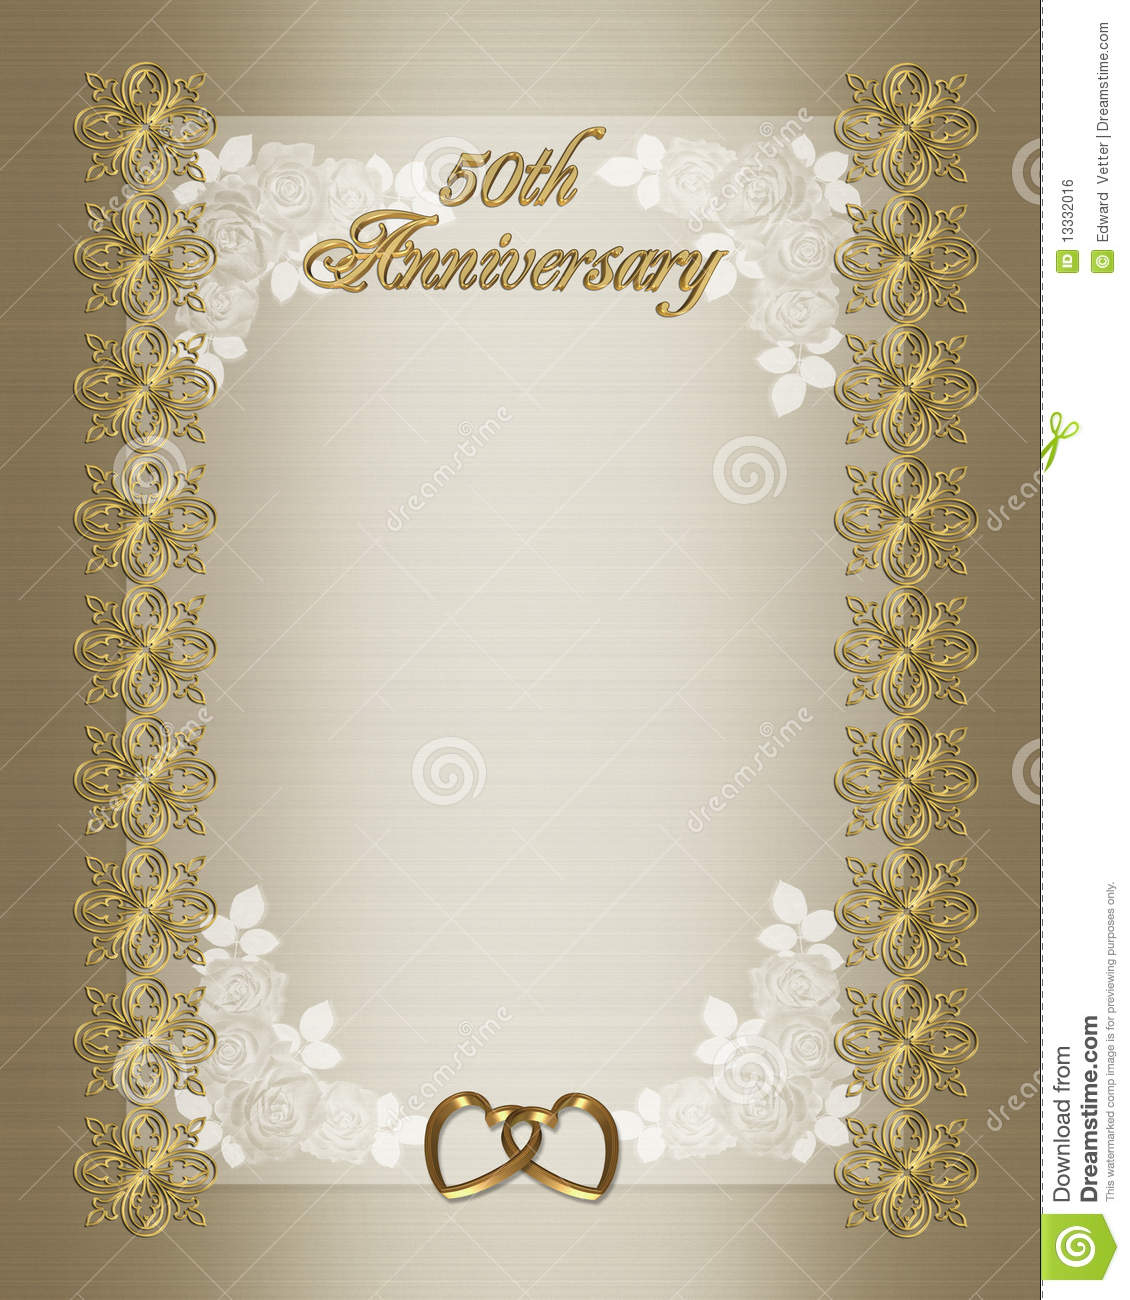 50th Wedding Anniversary Invitation Template Stock Illustration pertaining to proportions 1130 X 1300